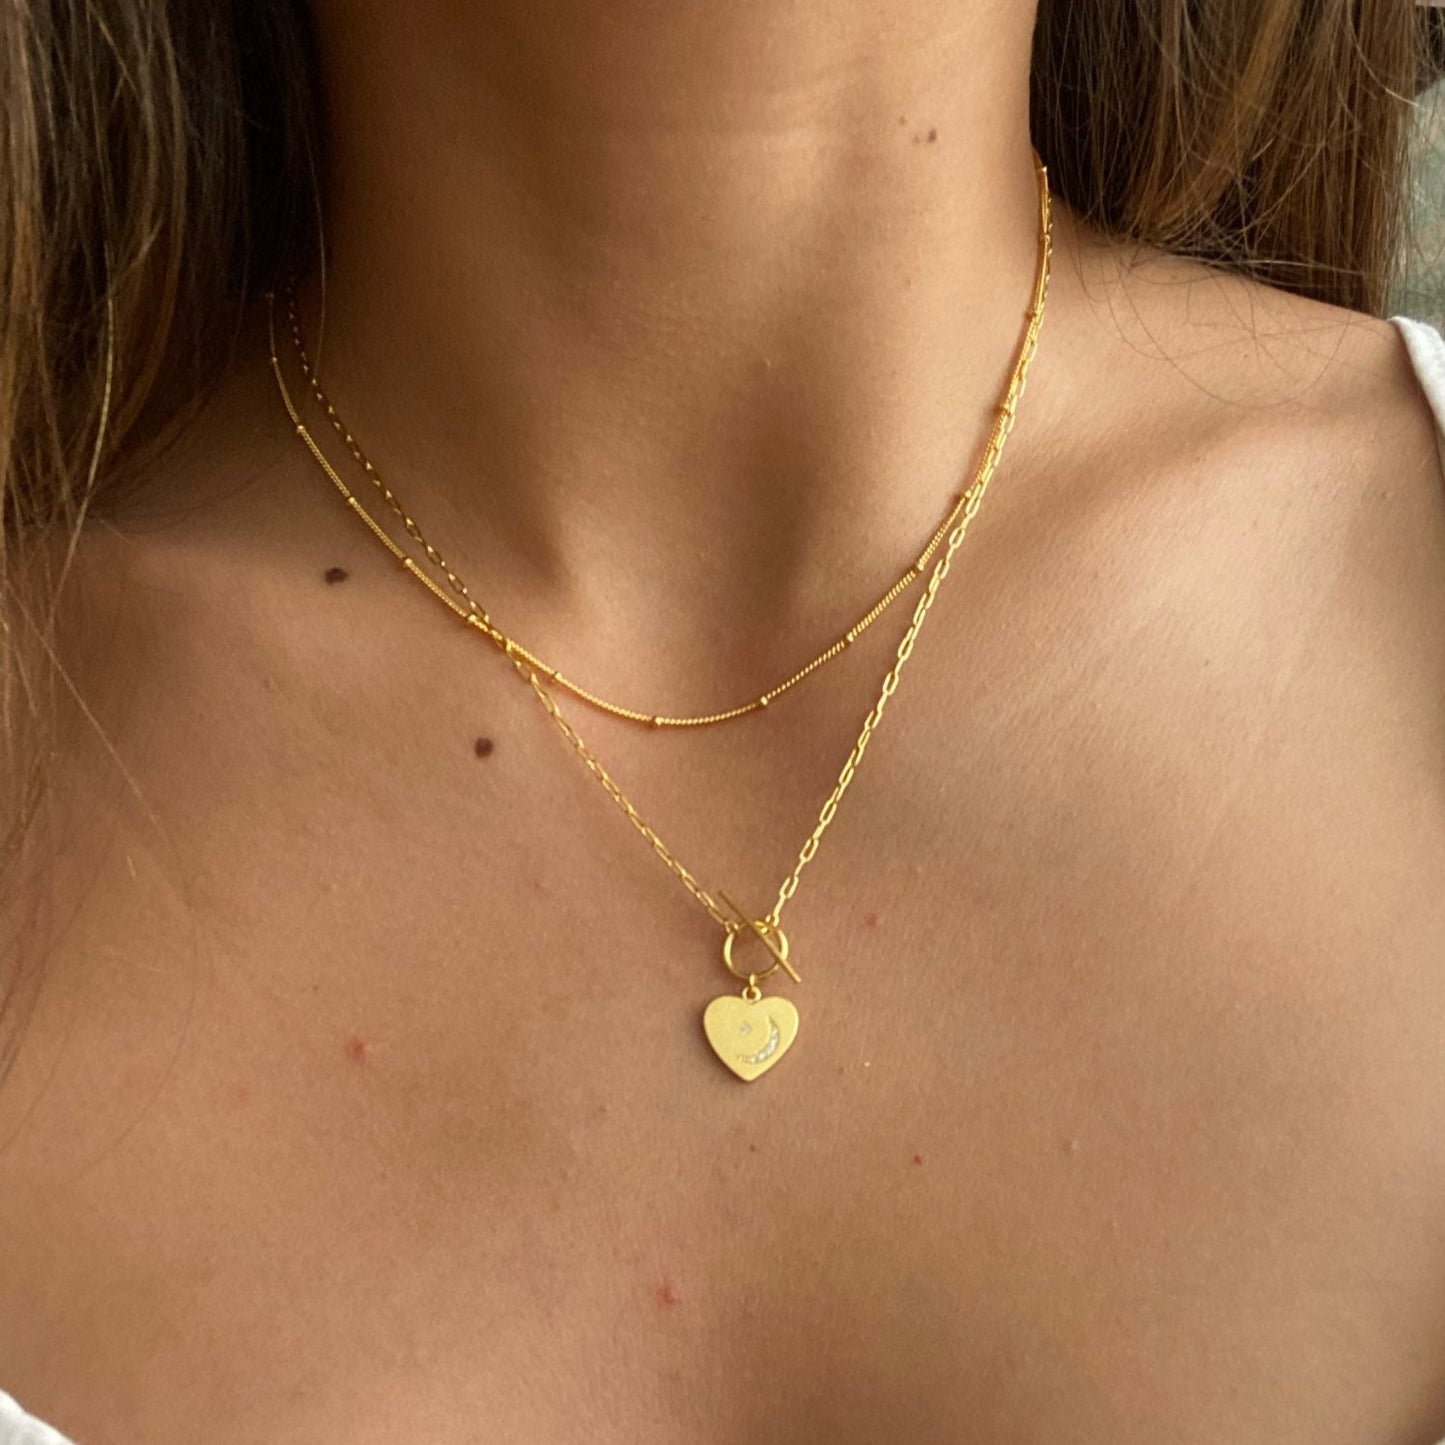 A woman wearing the Minimal Beaded Chain Necklace.